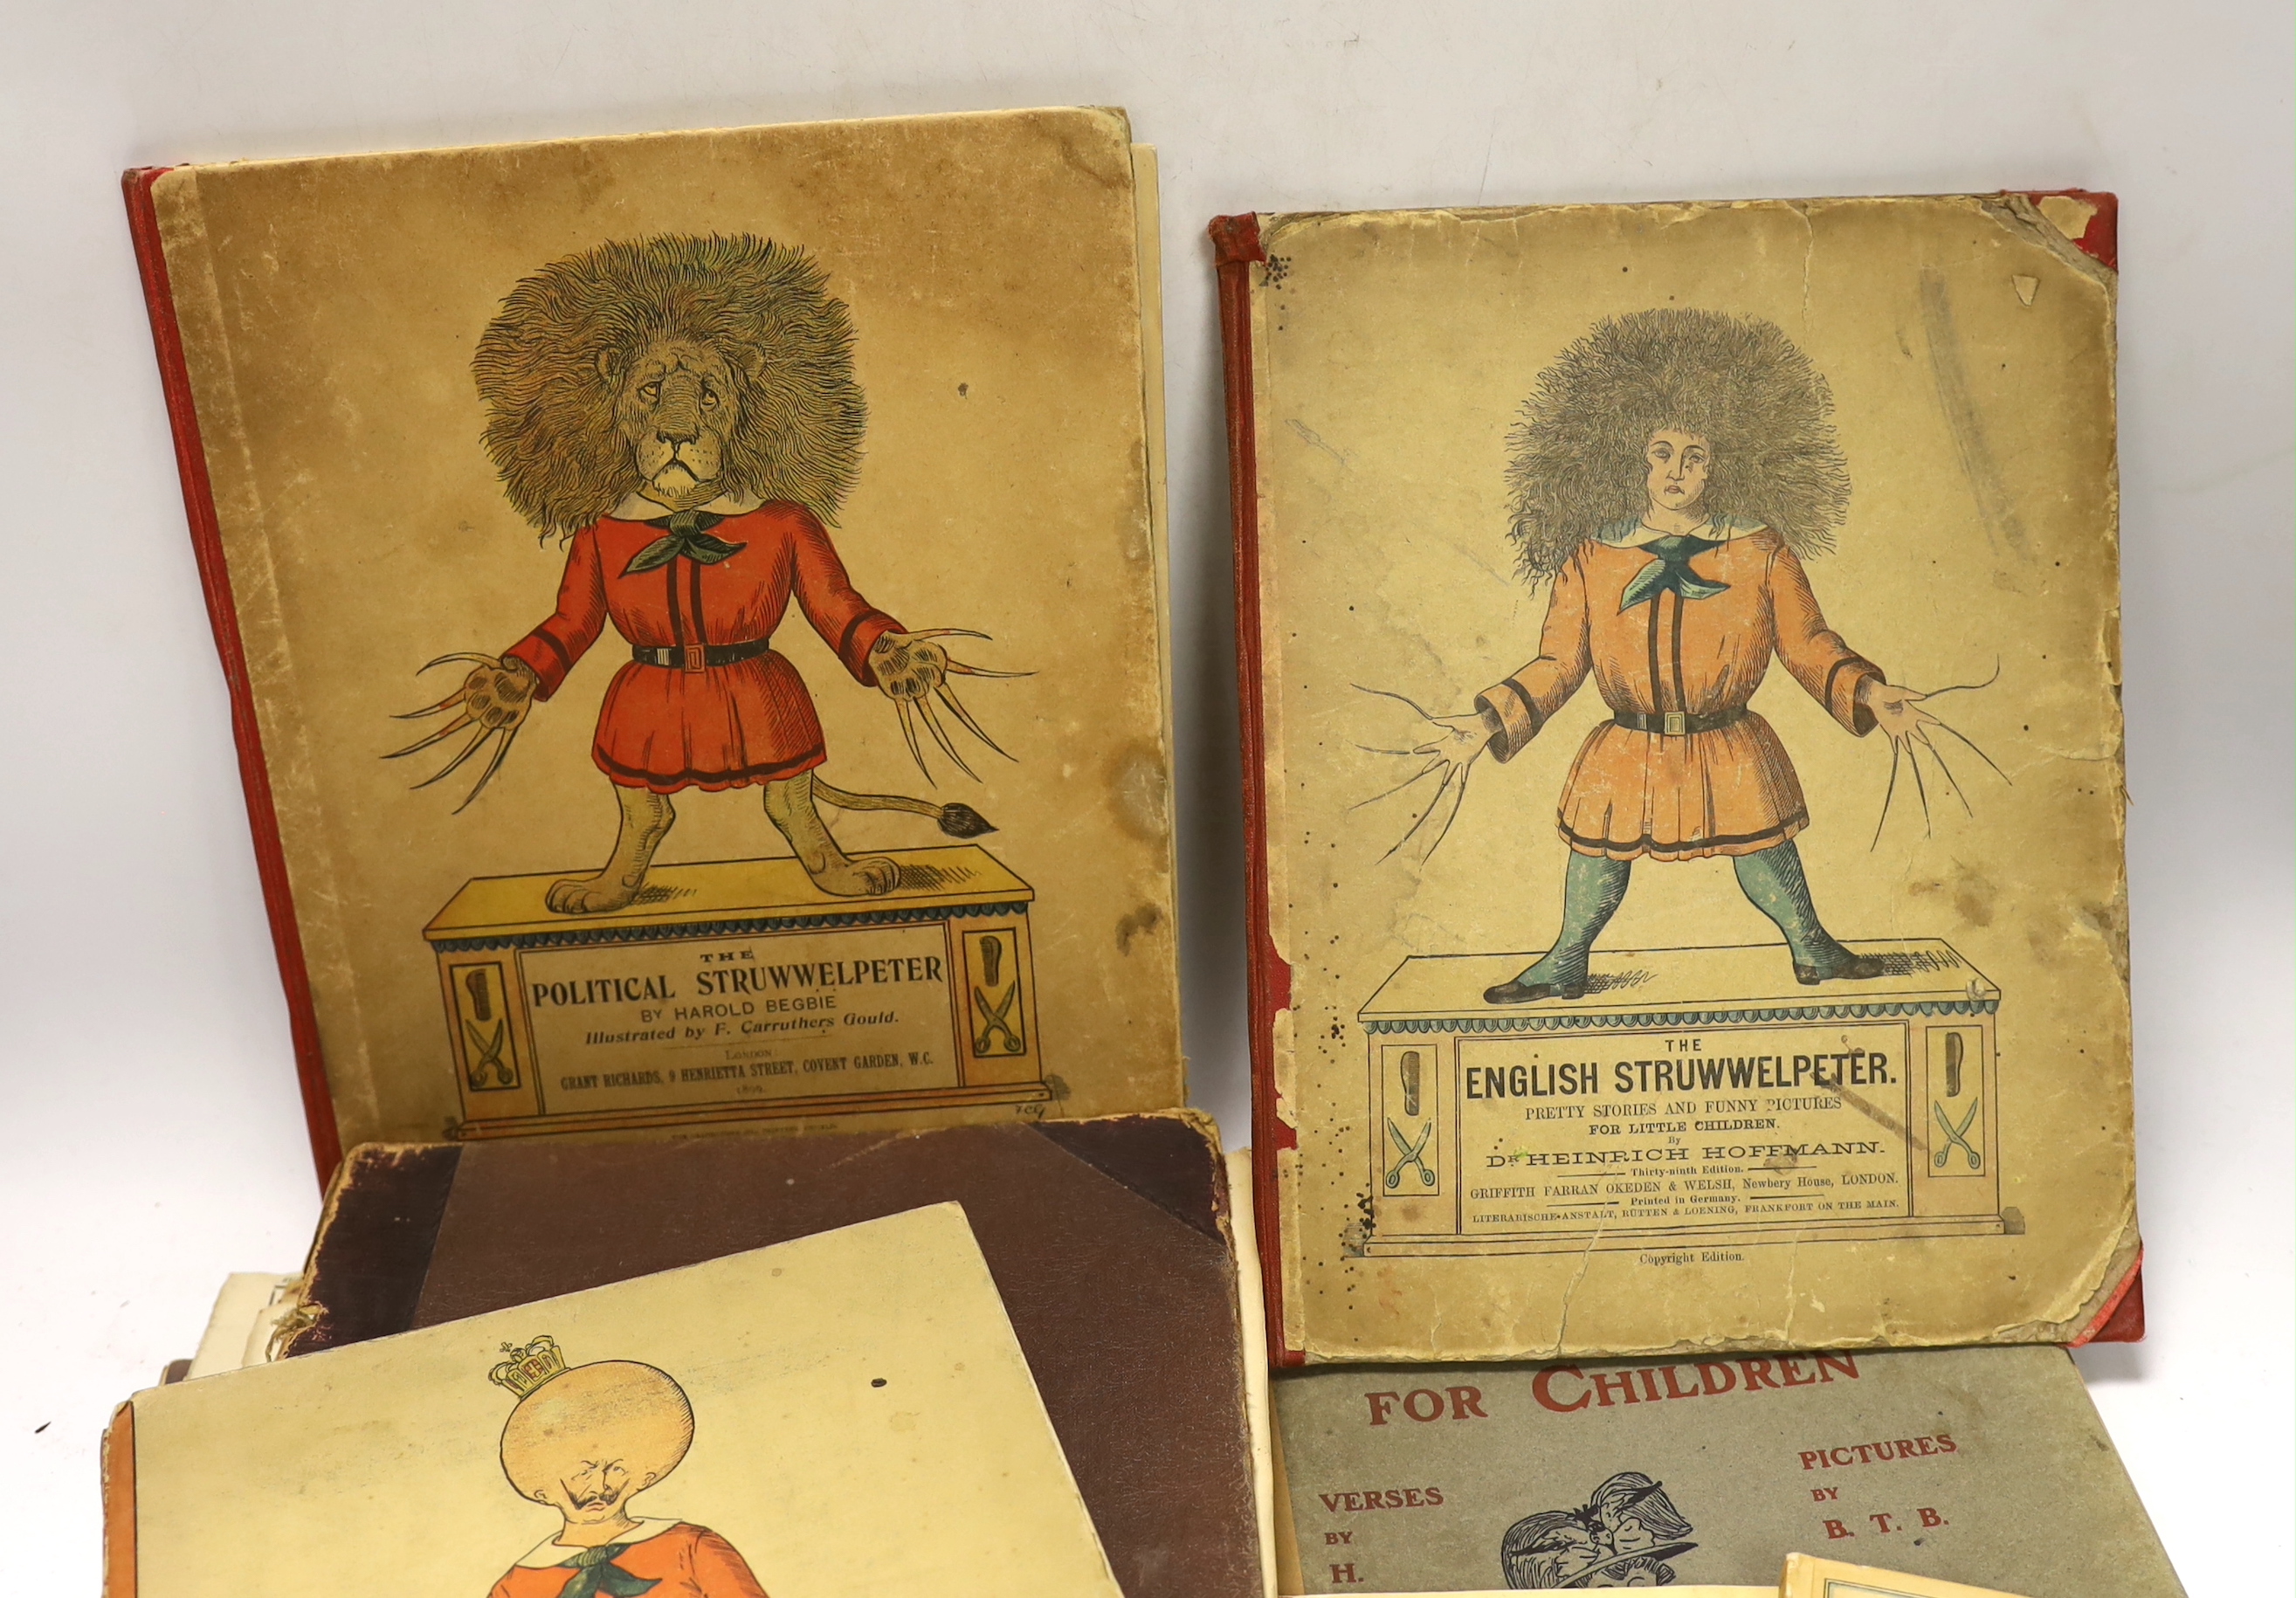 A quantity of different versions of Struwwelpeter and other books